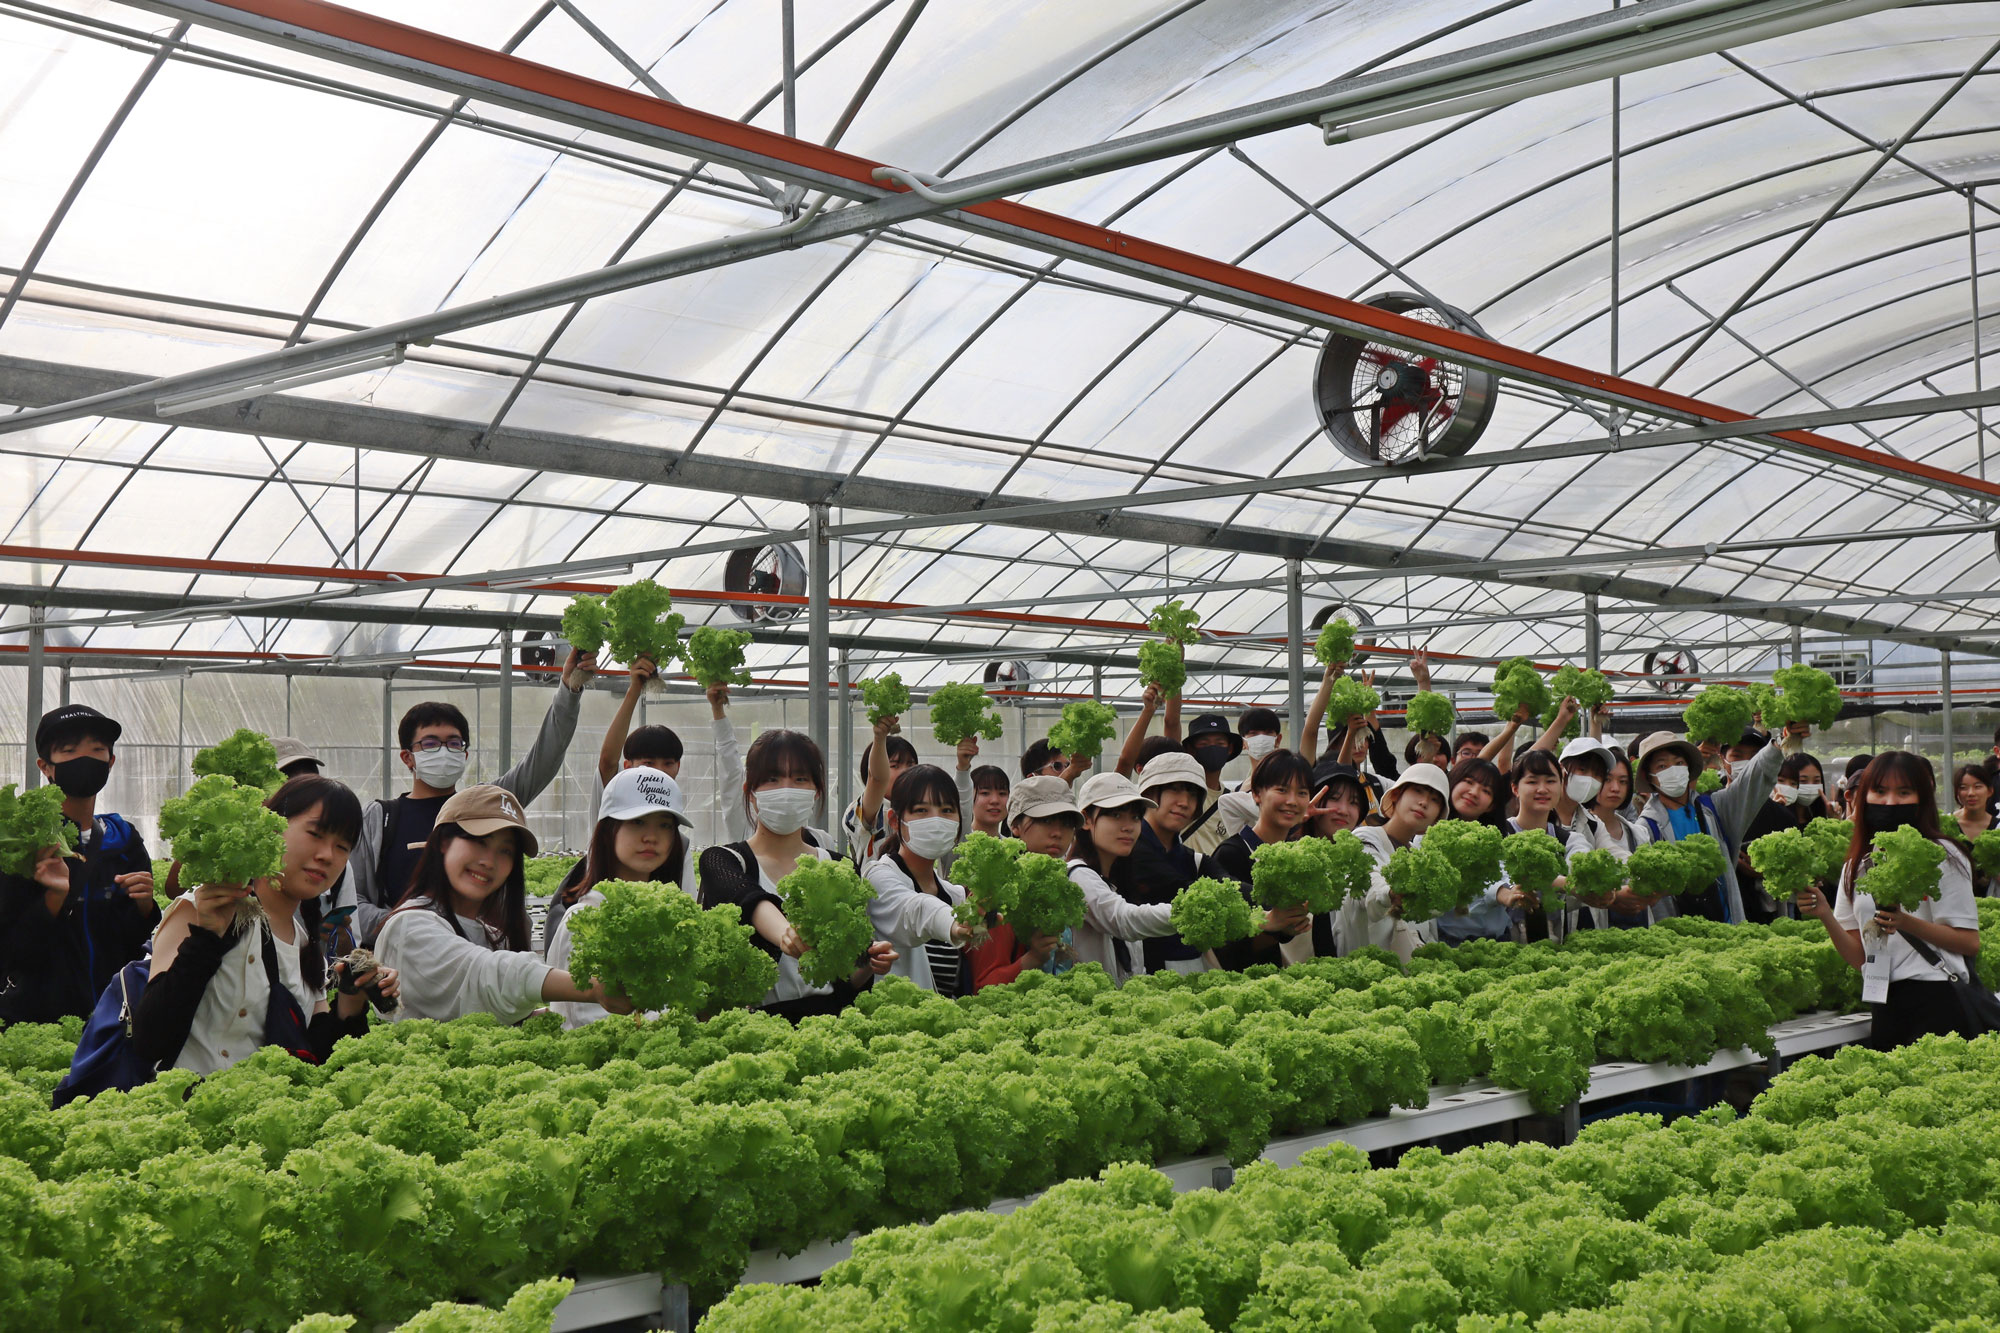 The Japanese students visit Serapi Farm, a modern agricultural farm at Matang, to experience the complete agricultural process from sowing to packaging.